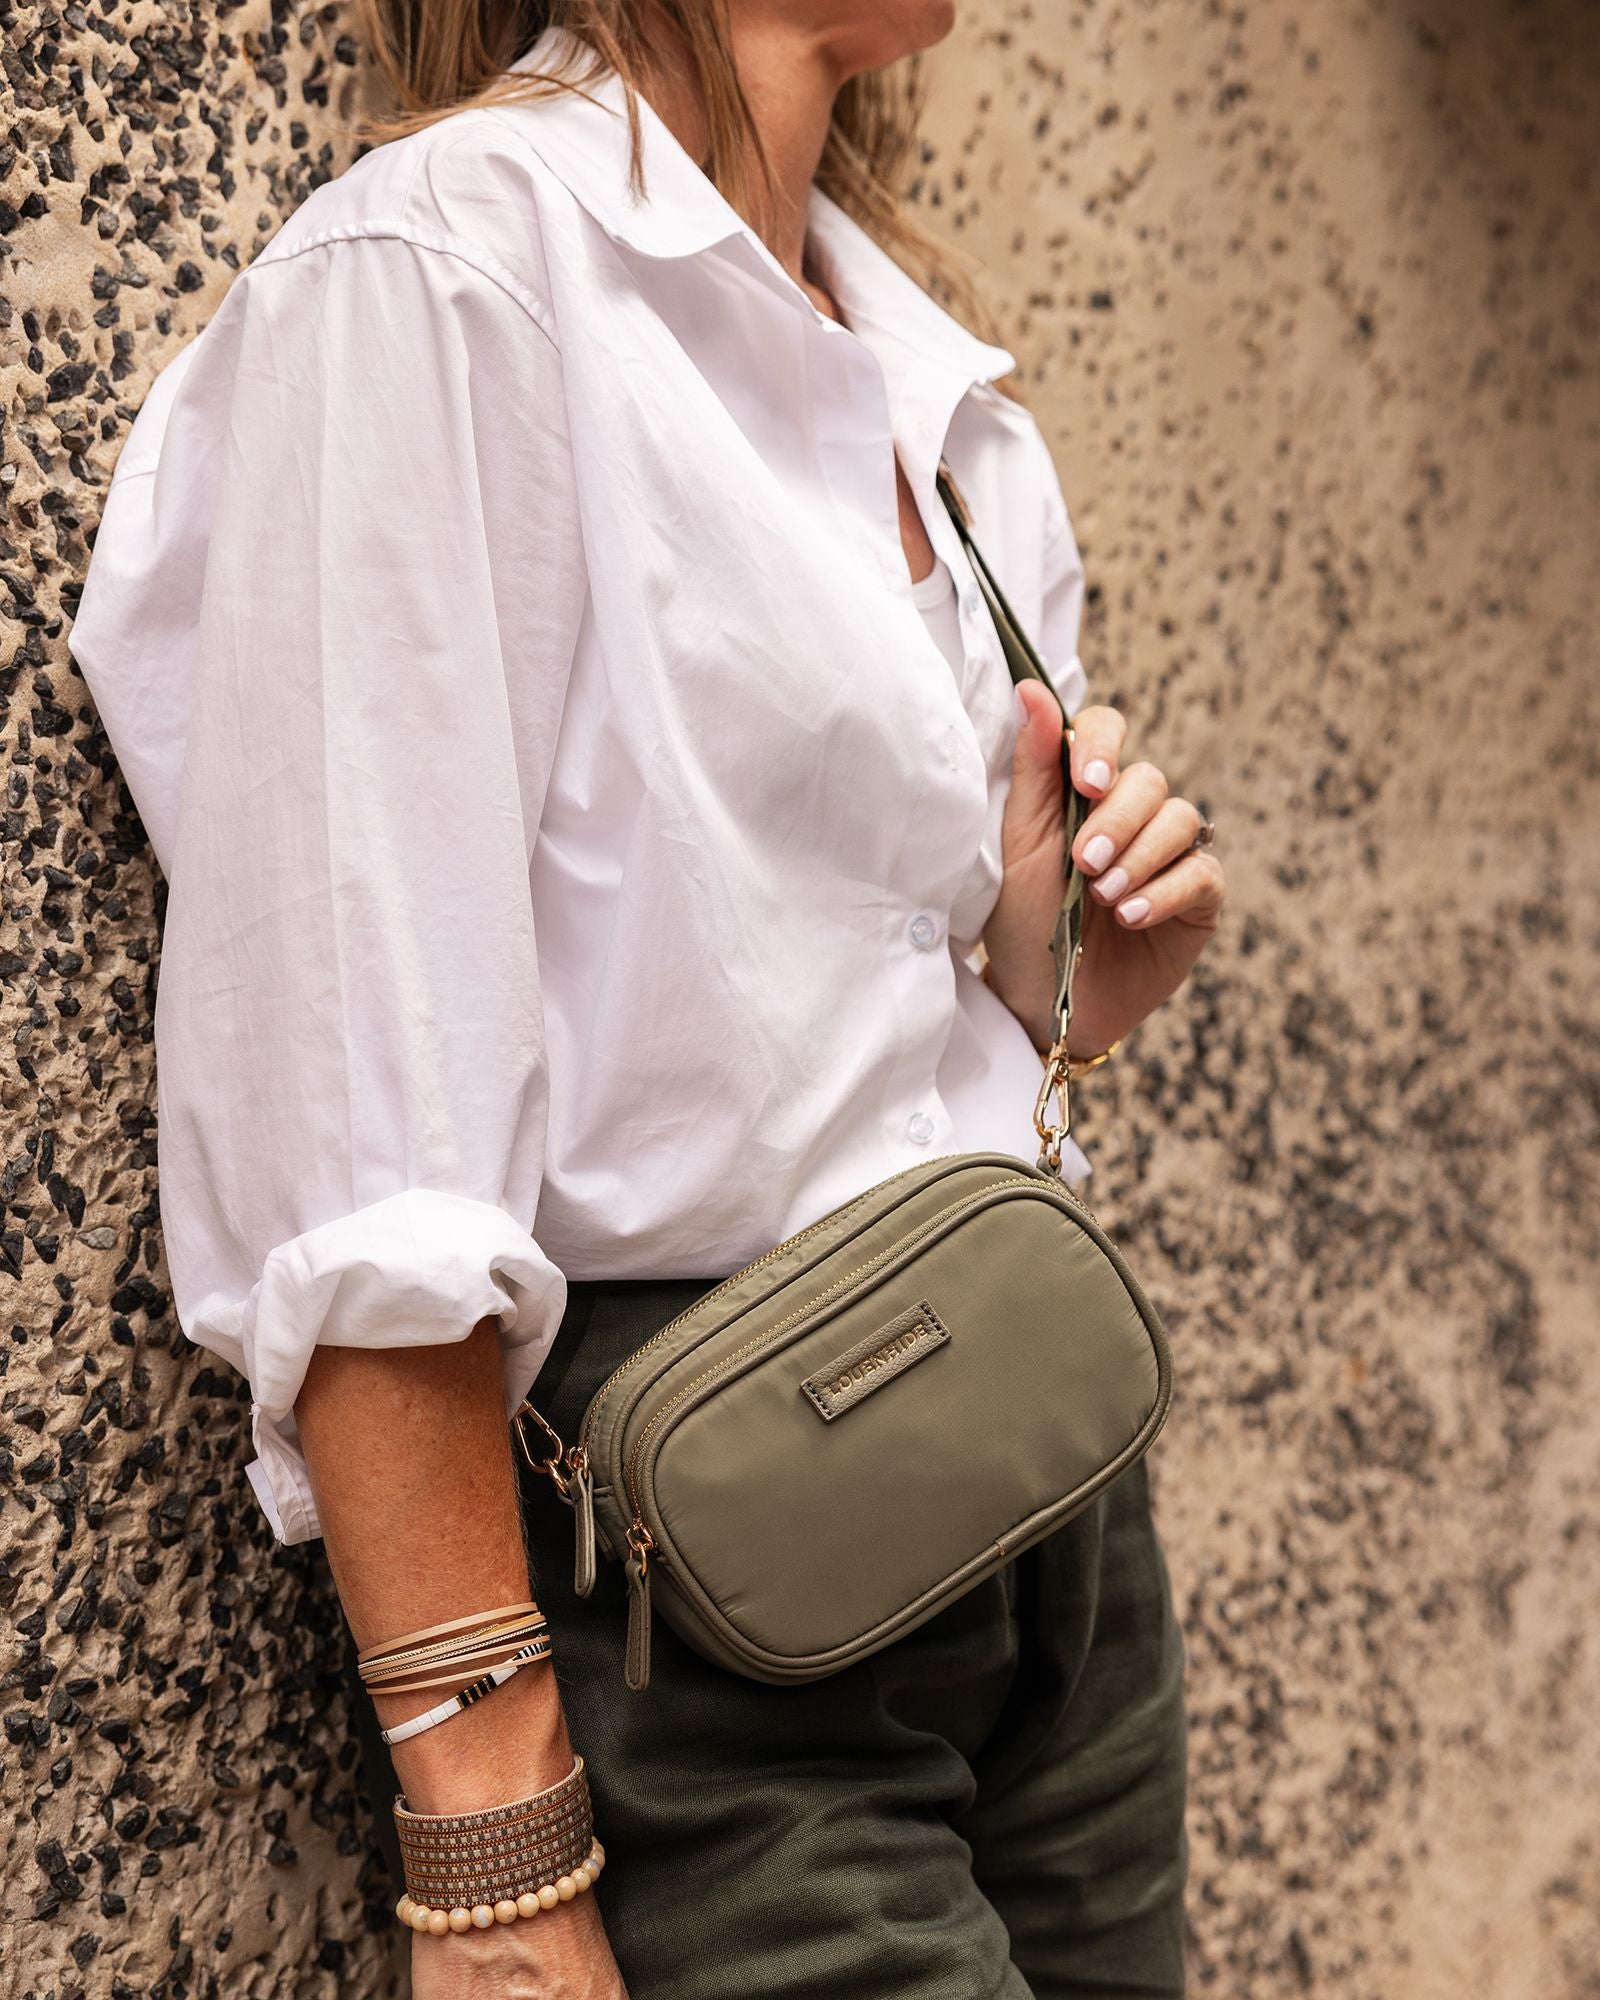 The Louenhide Cali Nylon Crossbody Bag is designed for comfort and convenience. The adjustable and detachable sateen guitar strap allows for comfortable wear crossbody or over the shoulder.